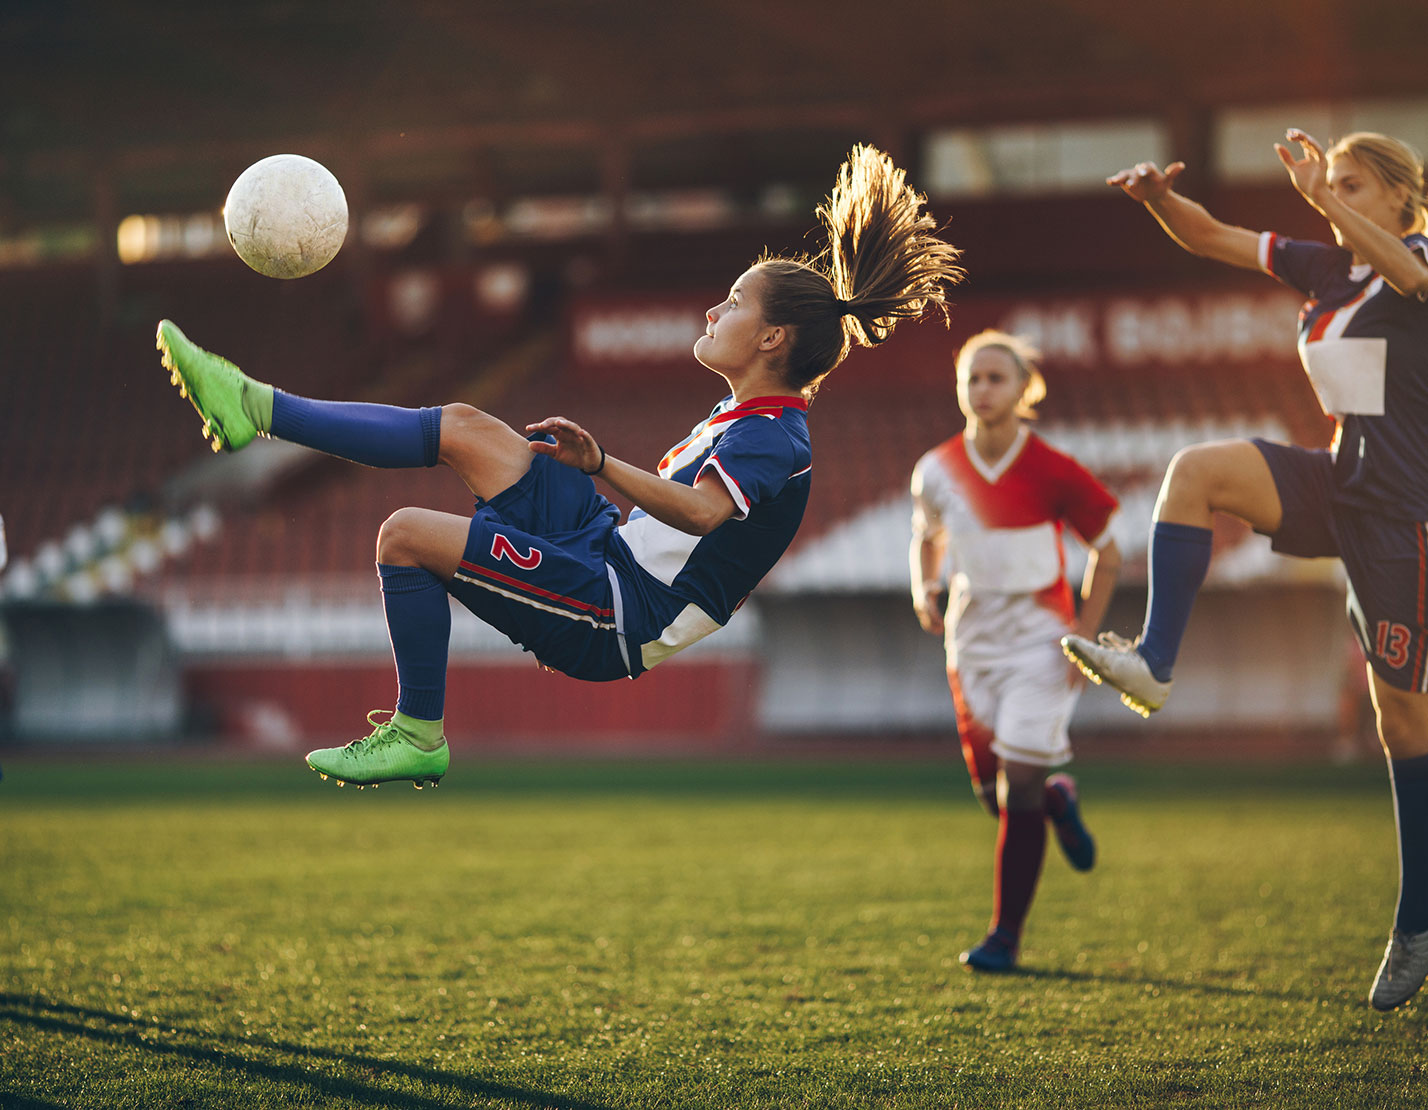 female soccer players in action on field